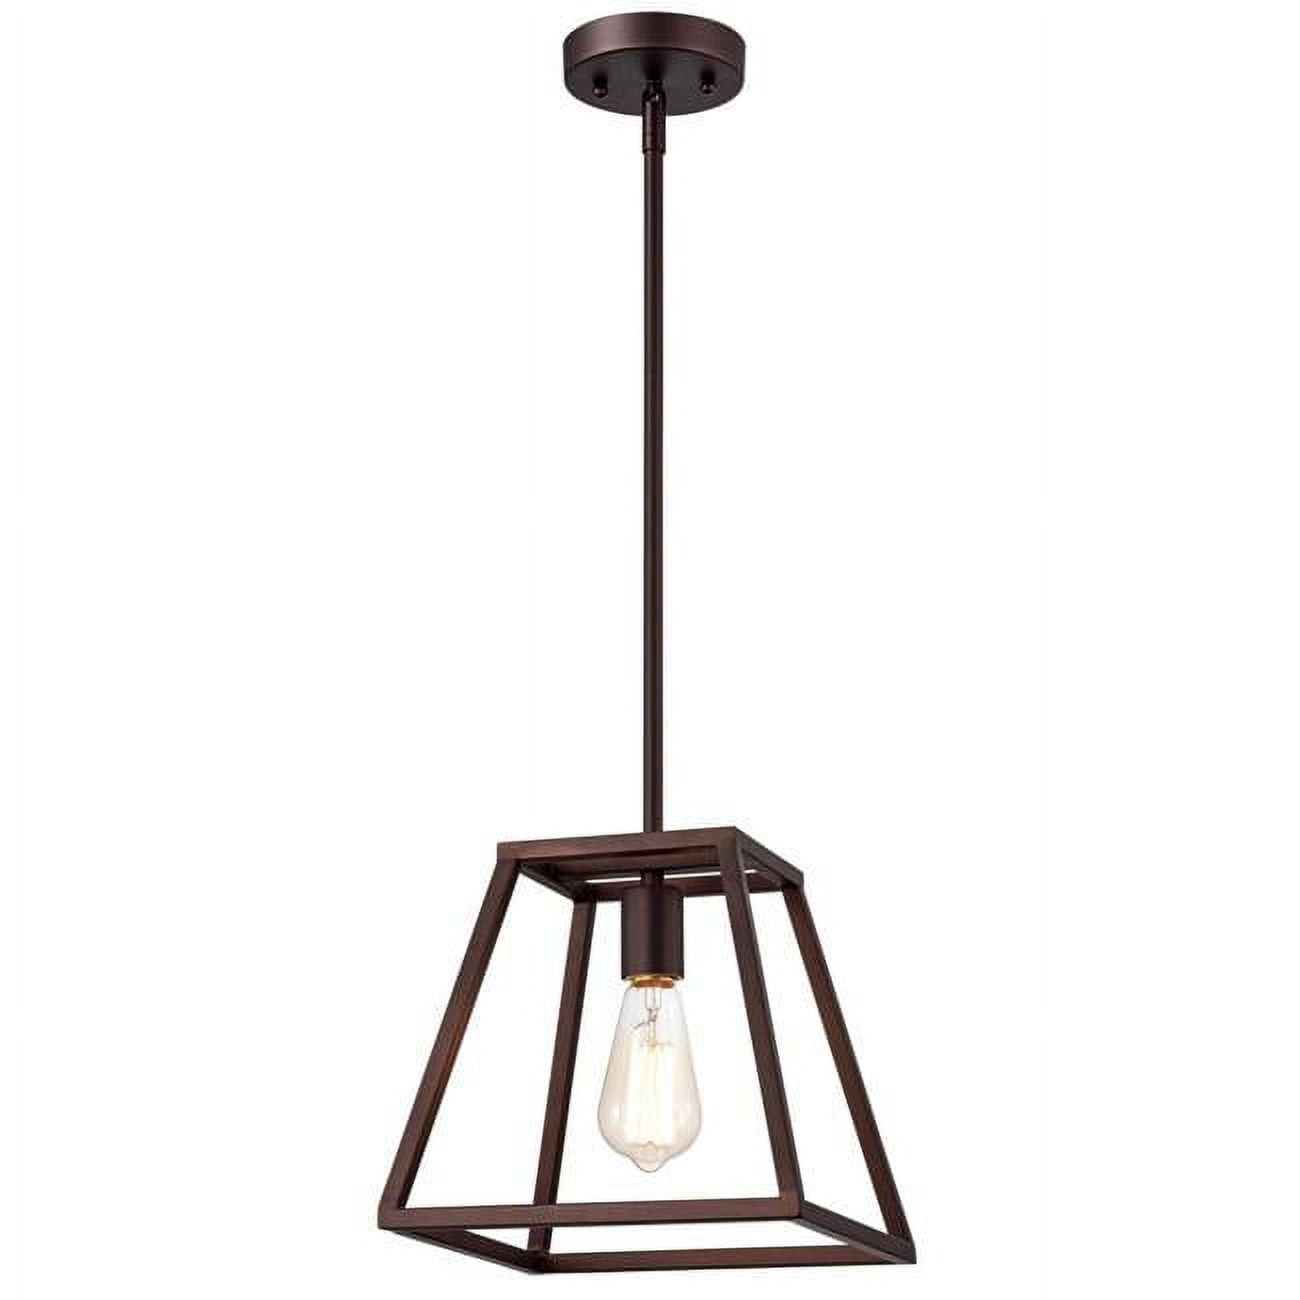 10 in. Ironclad Industrial 1 Light Mini Pendant Ceiling Fixture, Oil Rubbed Bronze -  FeeltheGlow, FE2828160